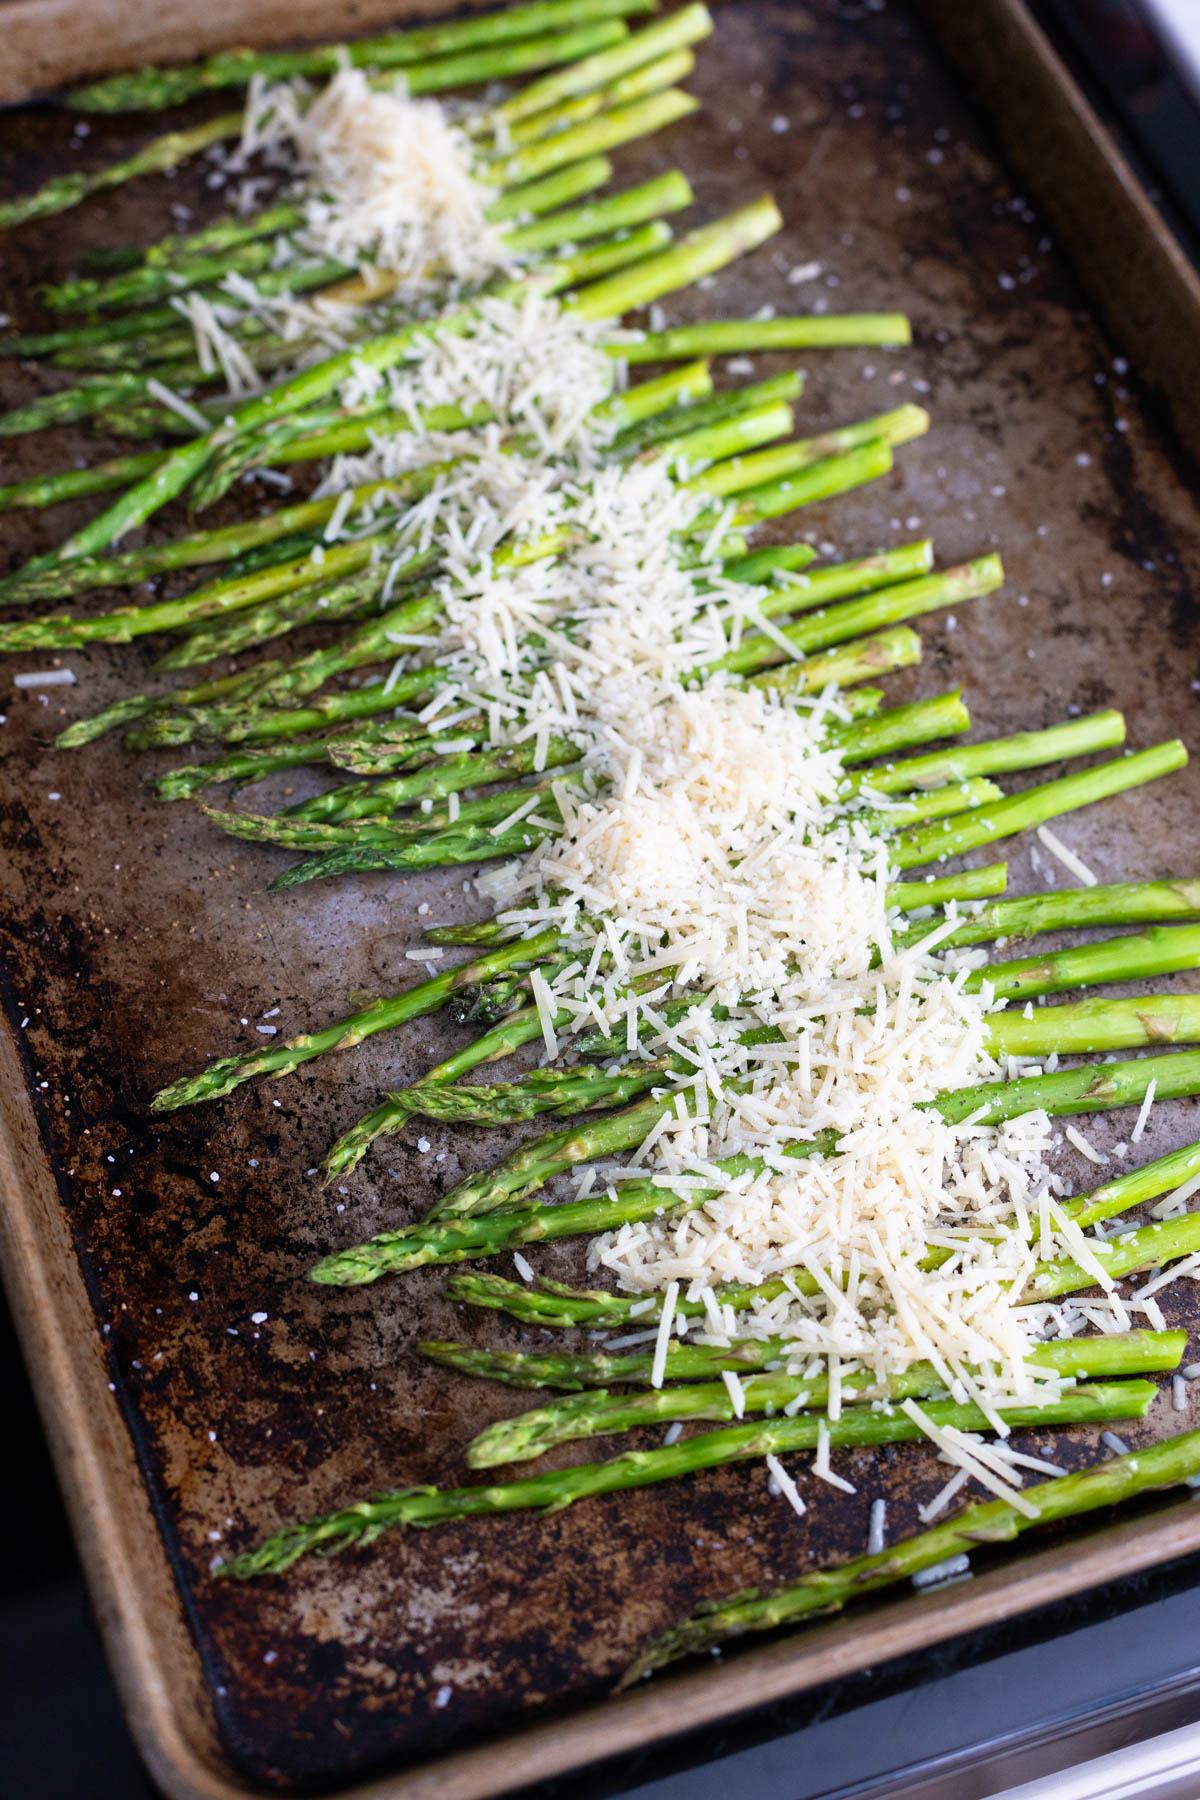 The shredded parmesan has been sprinkled over the asparagus on the baking sheet.